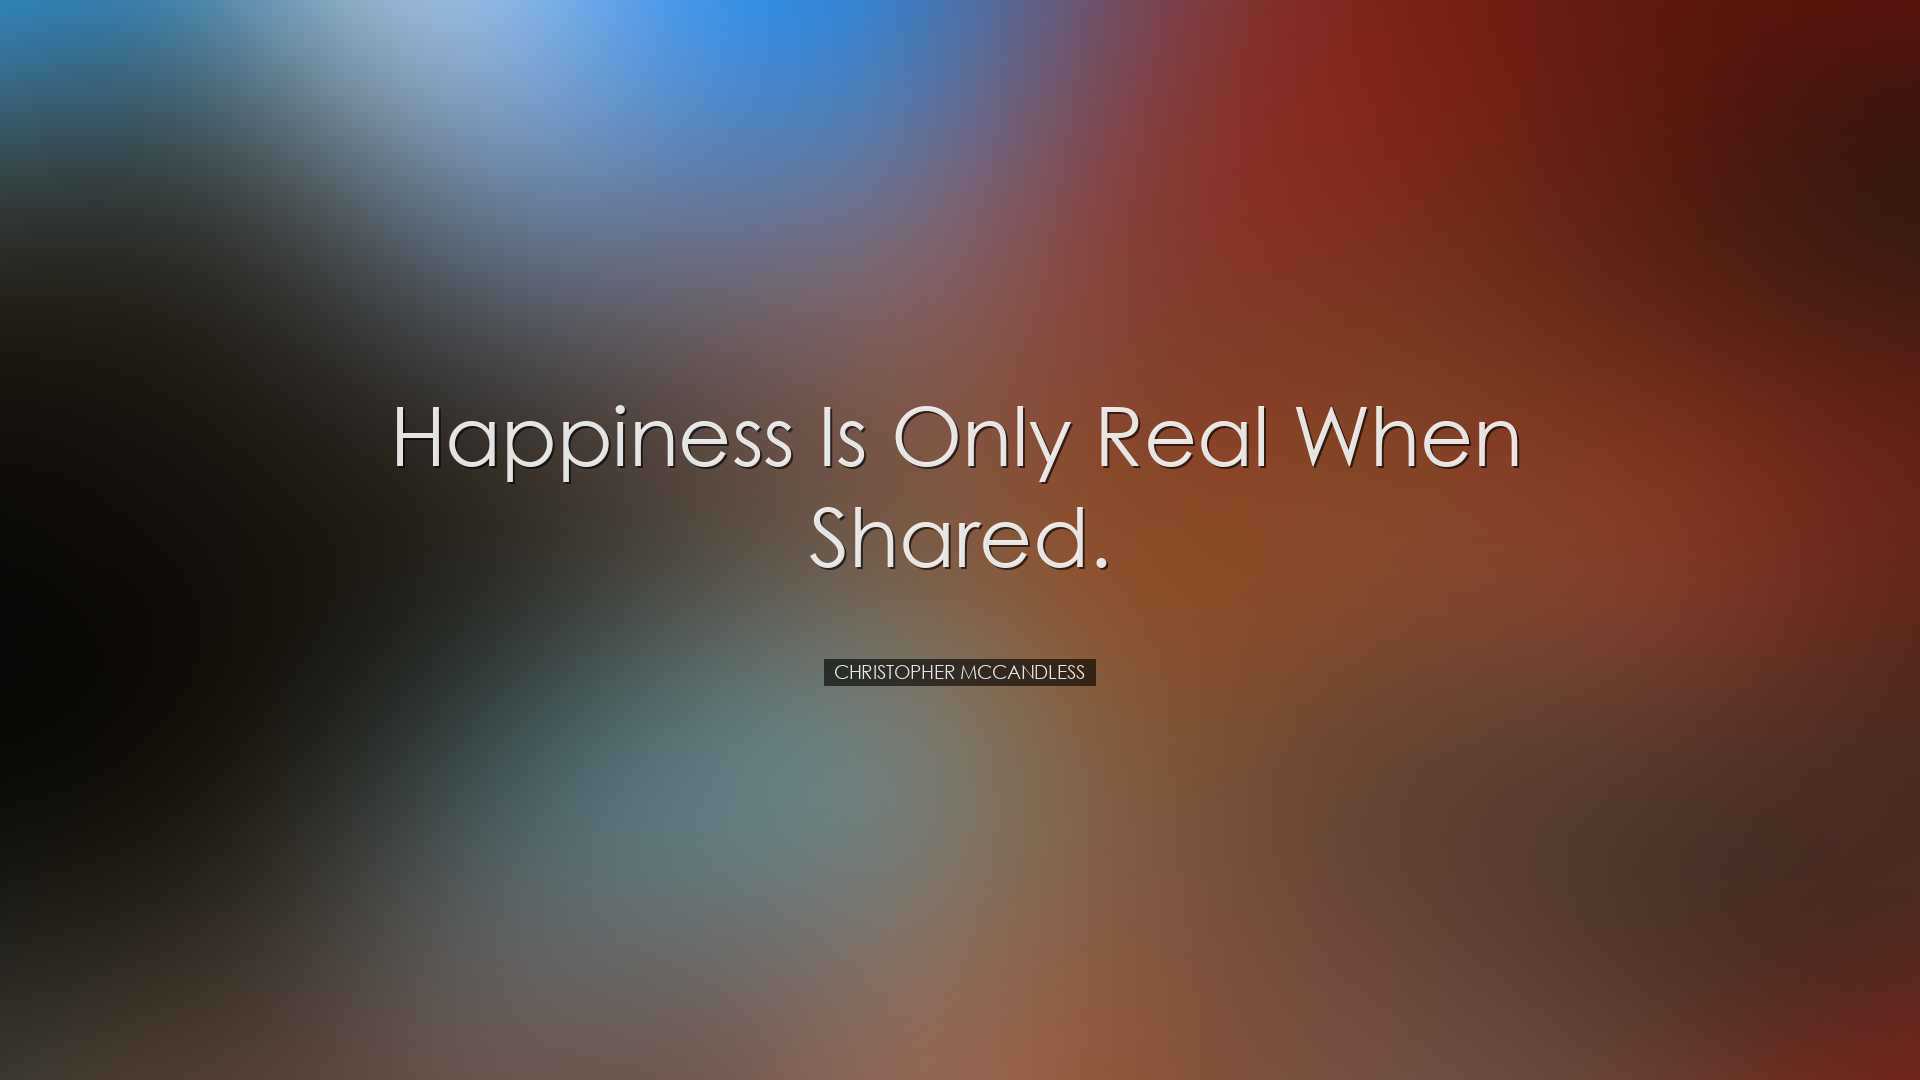 Happiness is only real when shared. - Christopher McCandless